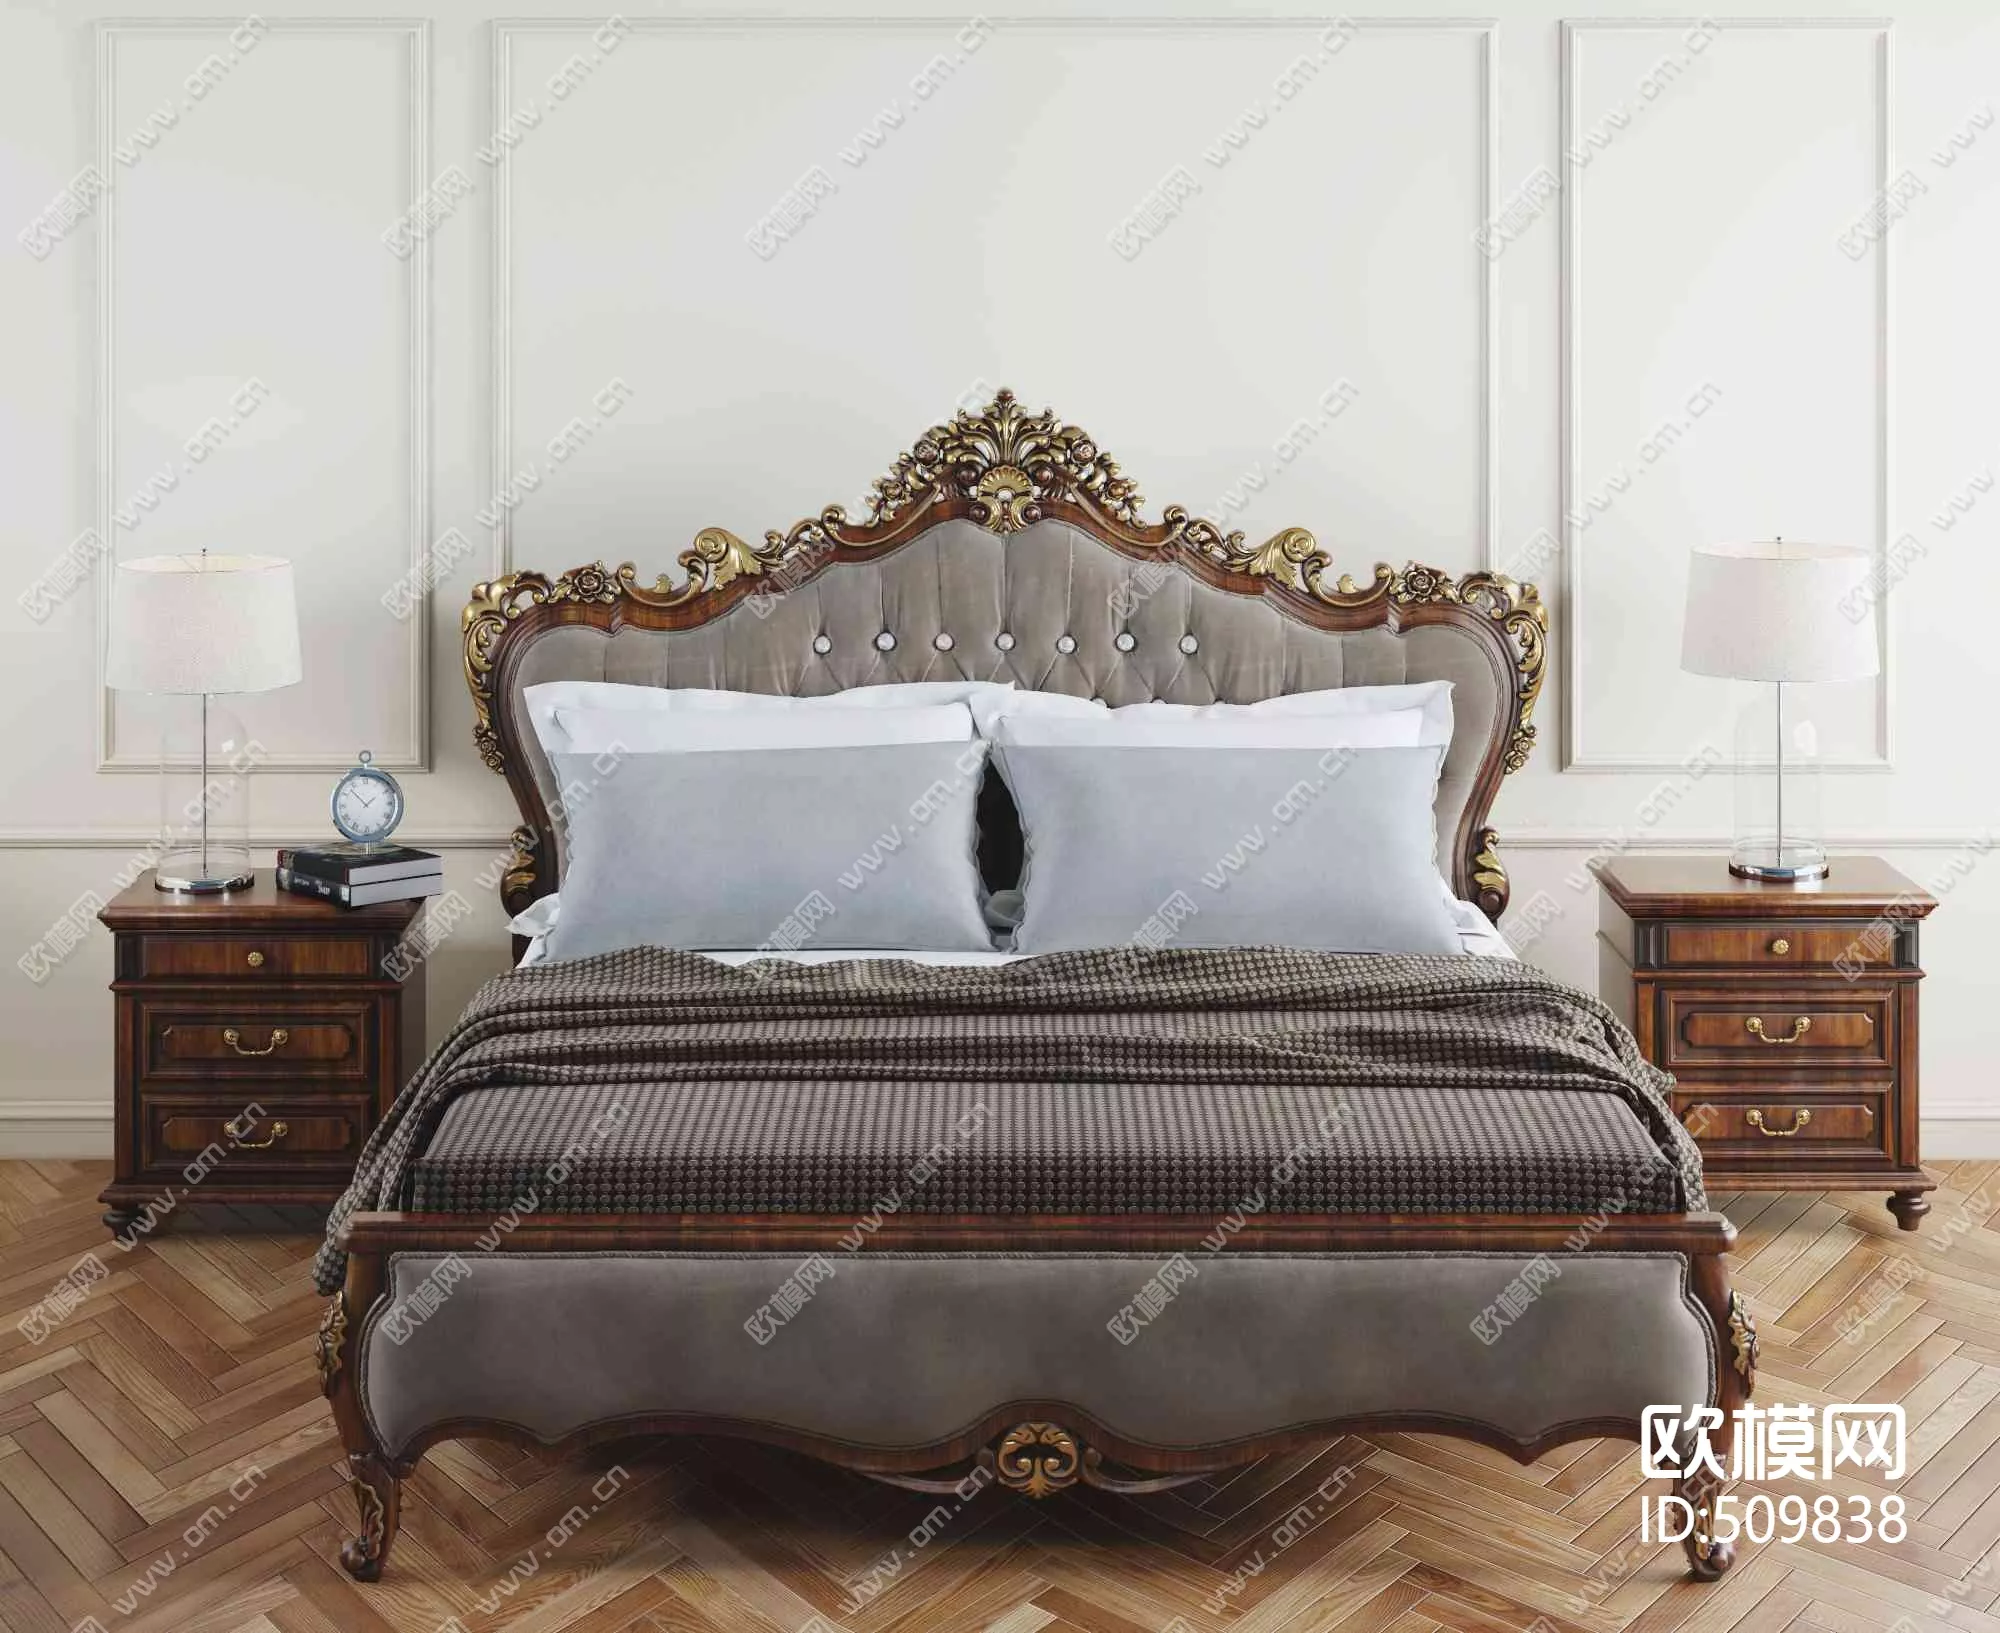 NEO CLASSIC BED - SKETCHUP 3D MODEL - VRAY OR ENSCAPE - ID16980